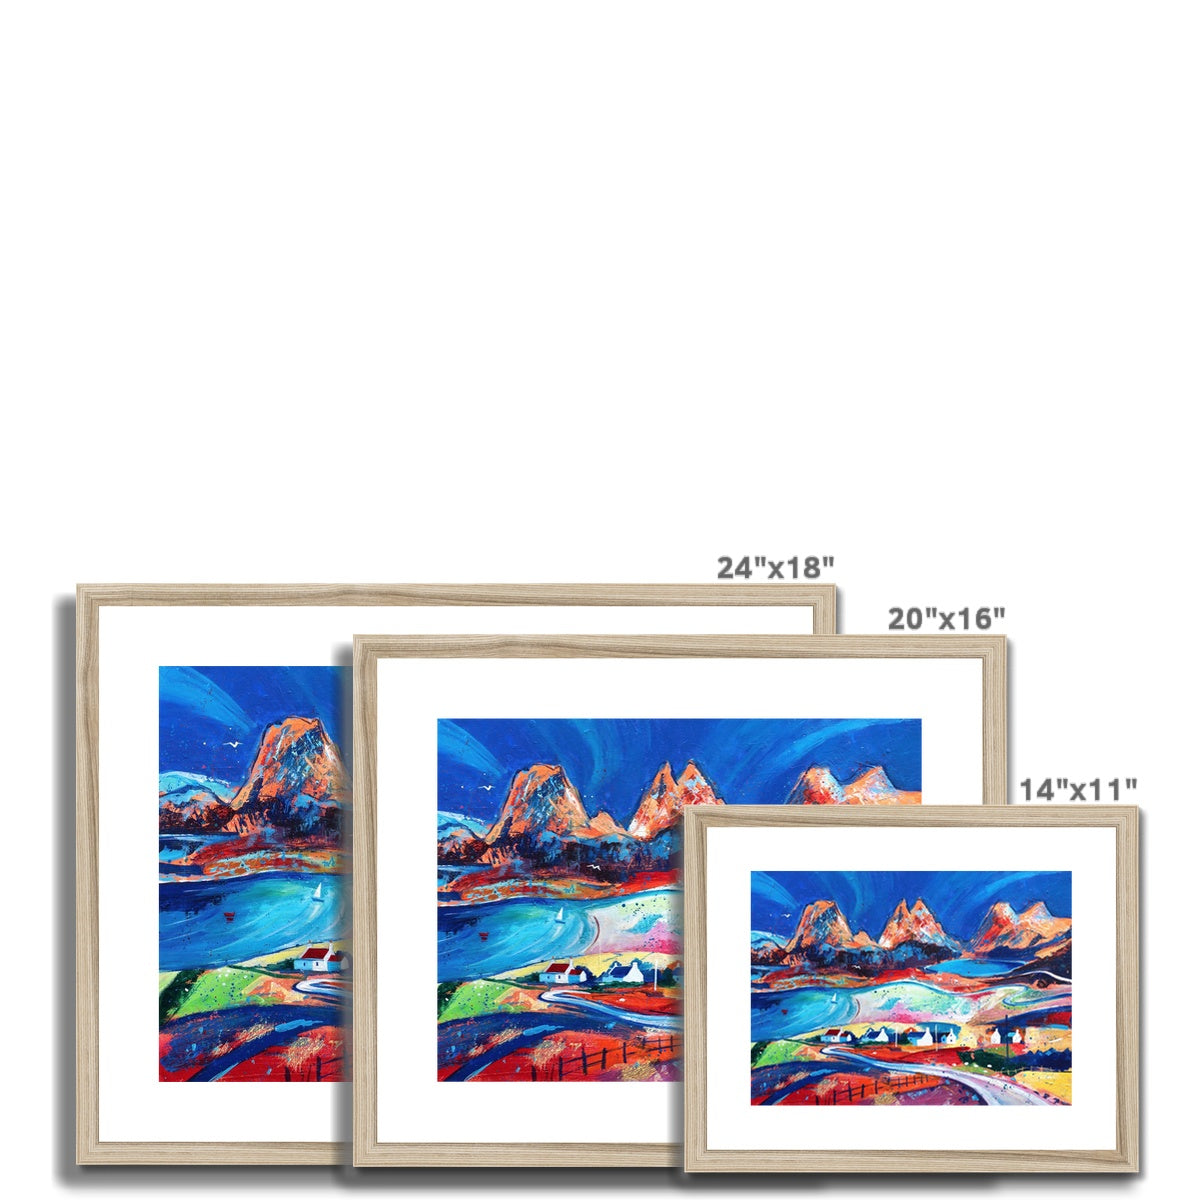 Summer's Day, Coigach Cottages to Stac Pollaidh Framed & Mounted Print